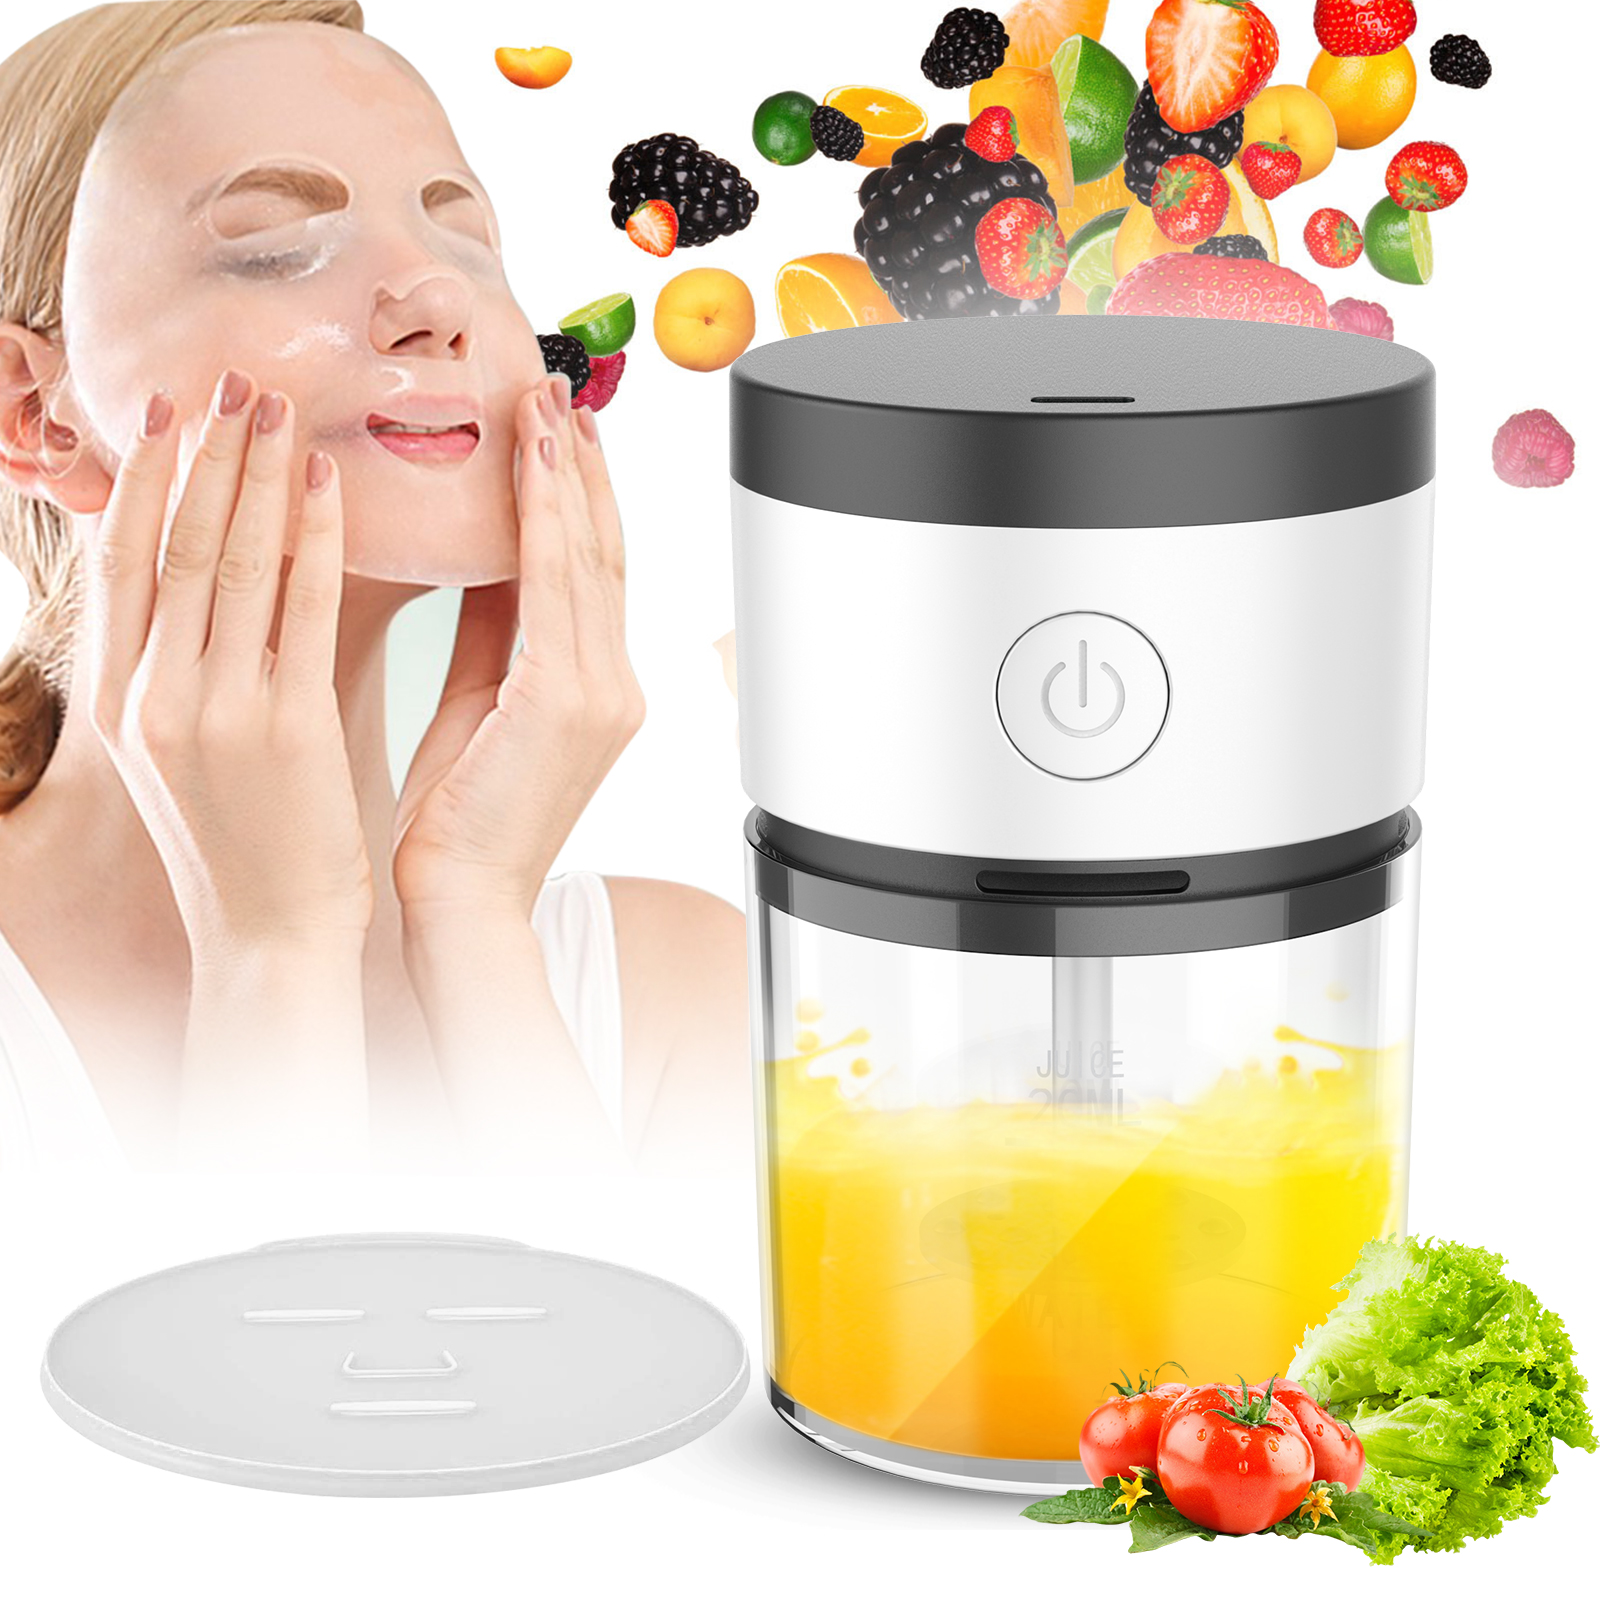 IFINE beauty personal skin care tool DIY Facial Fruit Mask Maker Machine Fruit Vegetable collagen Facial Mask device